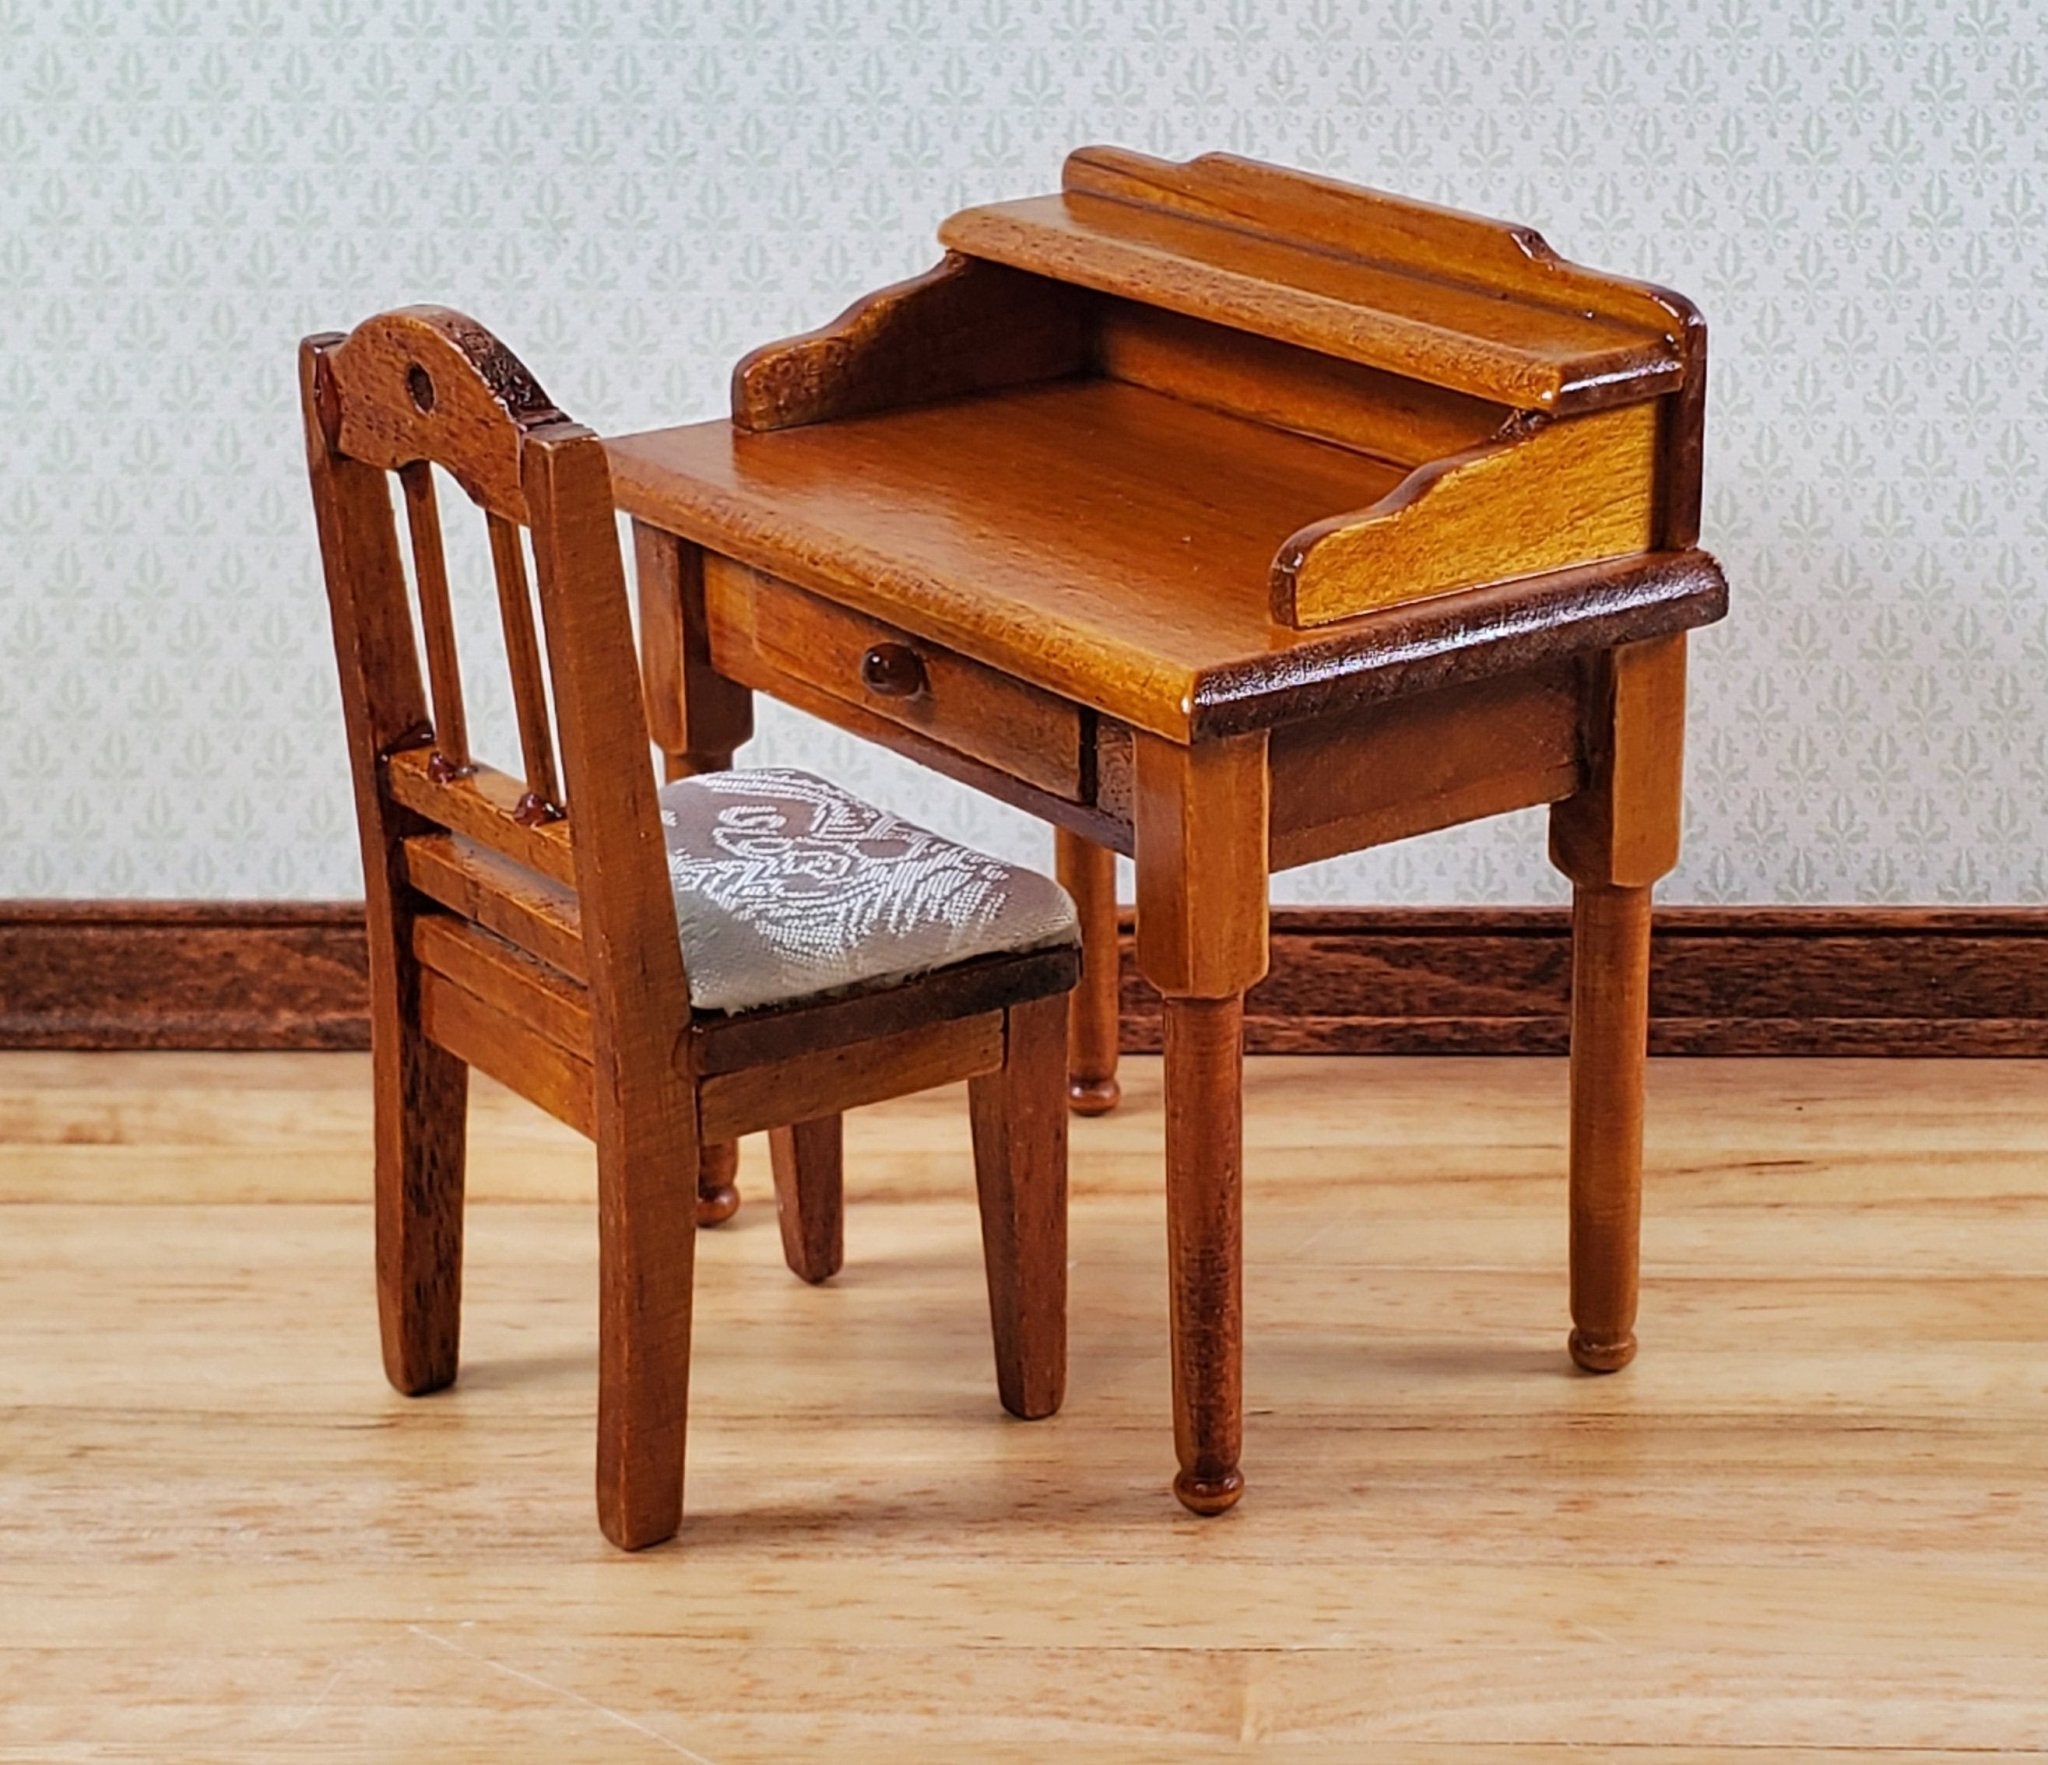 Dollhouse Writing Desk with Chair Walnut Finish Small Profile 1:12 Scale  Furniture